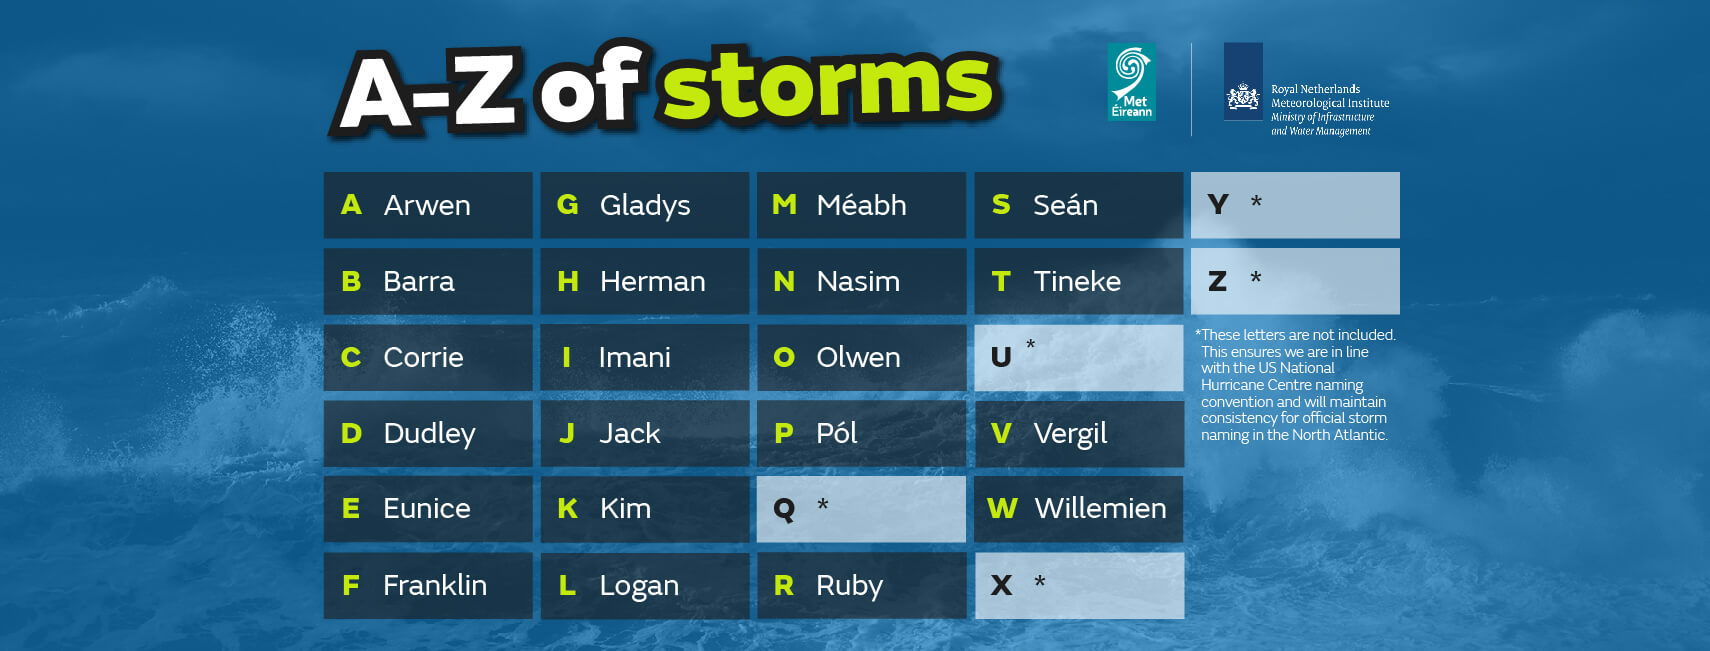 Graphic revealing the storm names for 2021/22. The full list can be read at the bottom of this release.